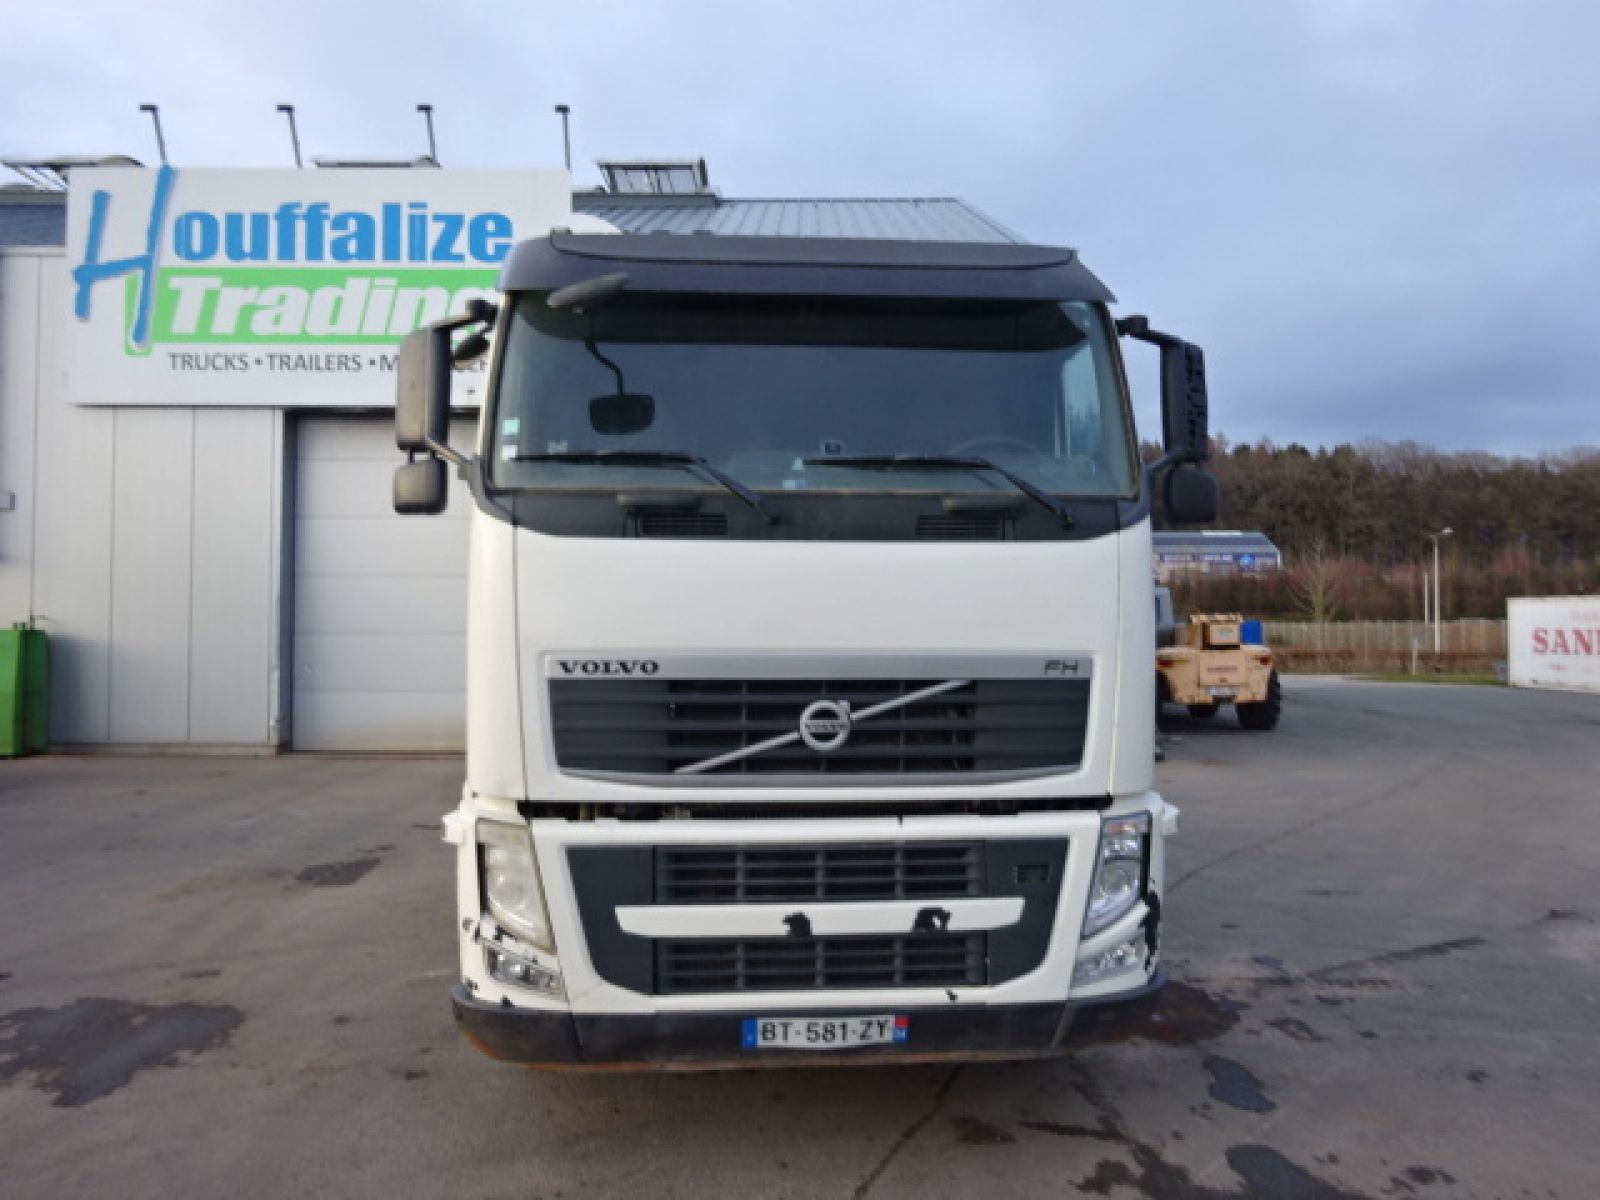  Unidades tractoras - VOLVO FH 460  Tracteur (Belgique - Europe) - Houffalize Trading s.a.